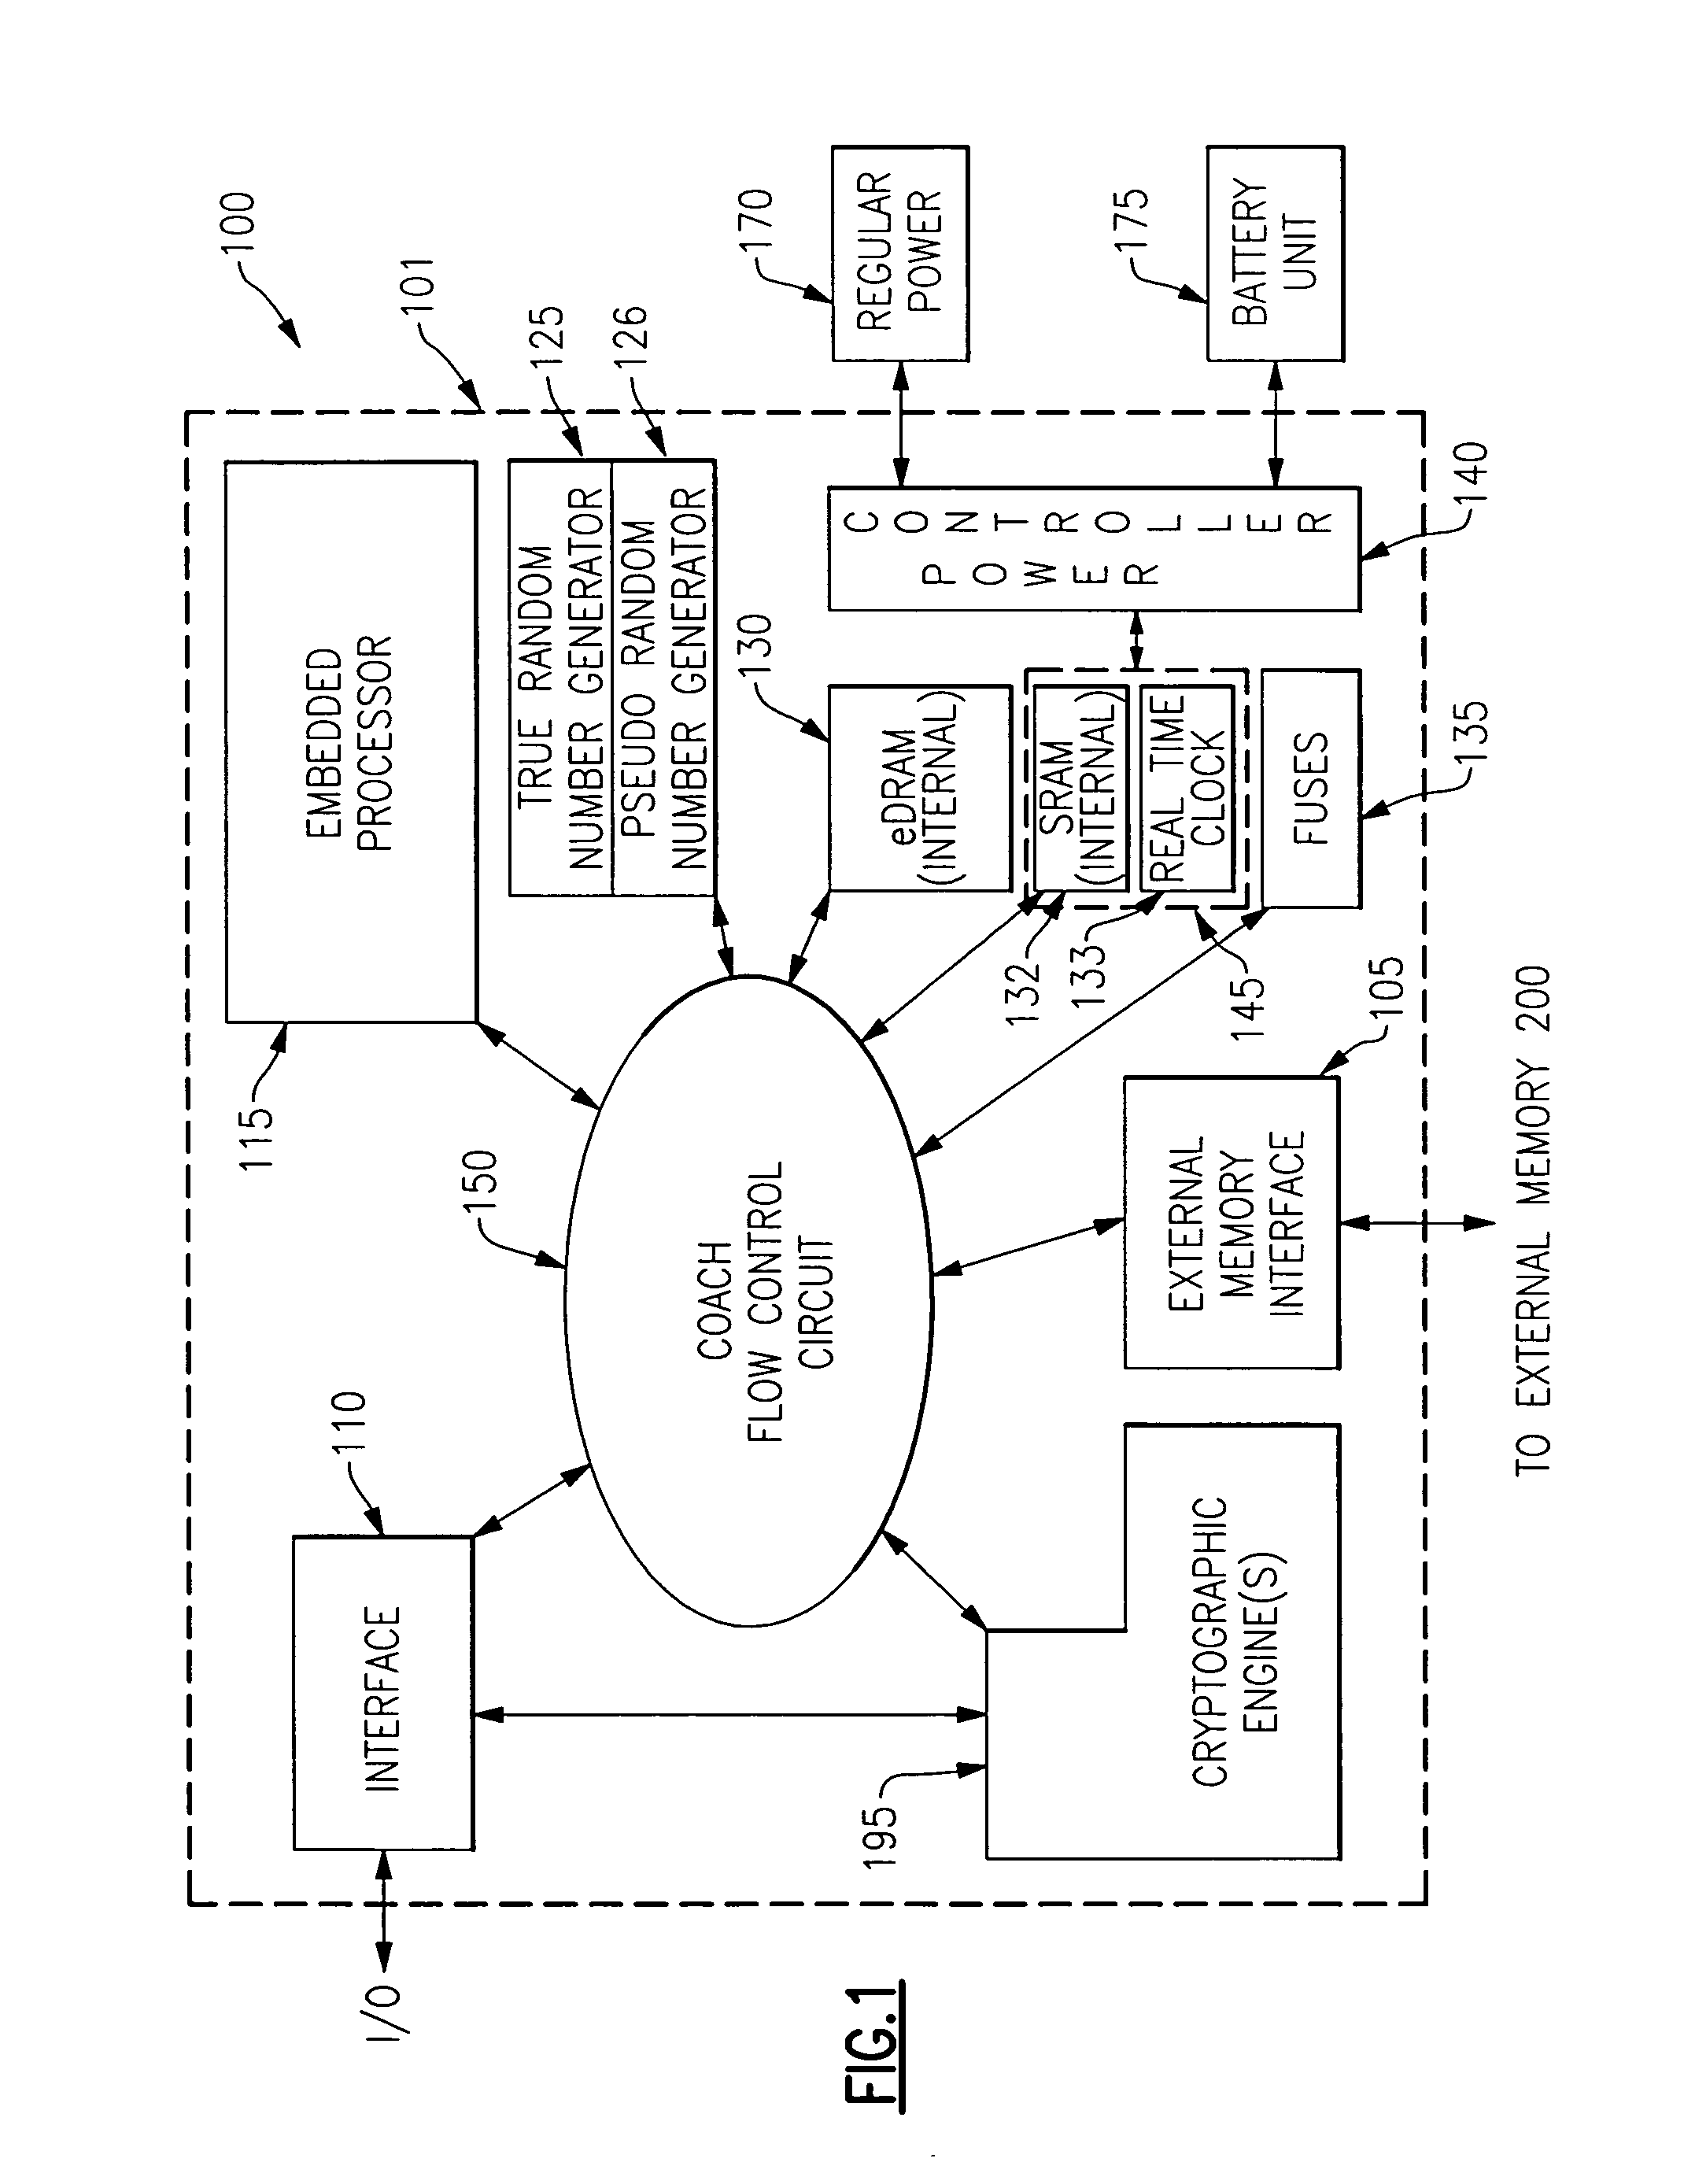 Integrated circuit chip for encryption and decryption using instructions supplied through a secure interface